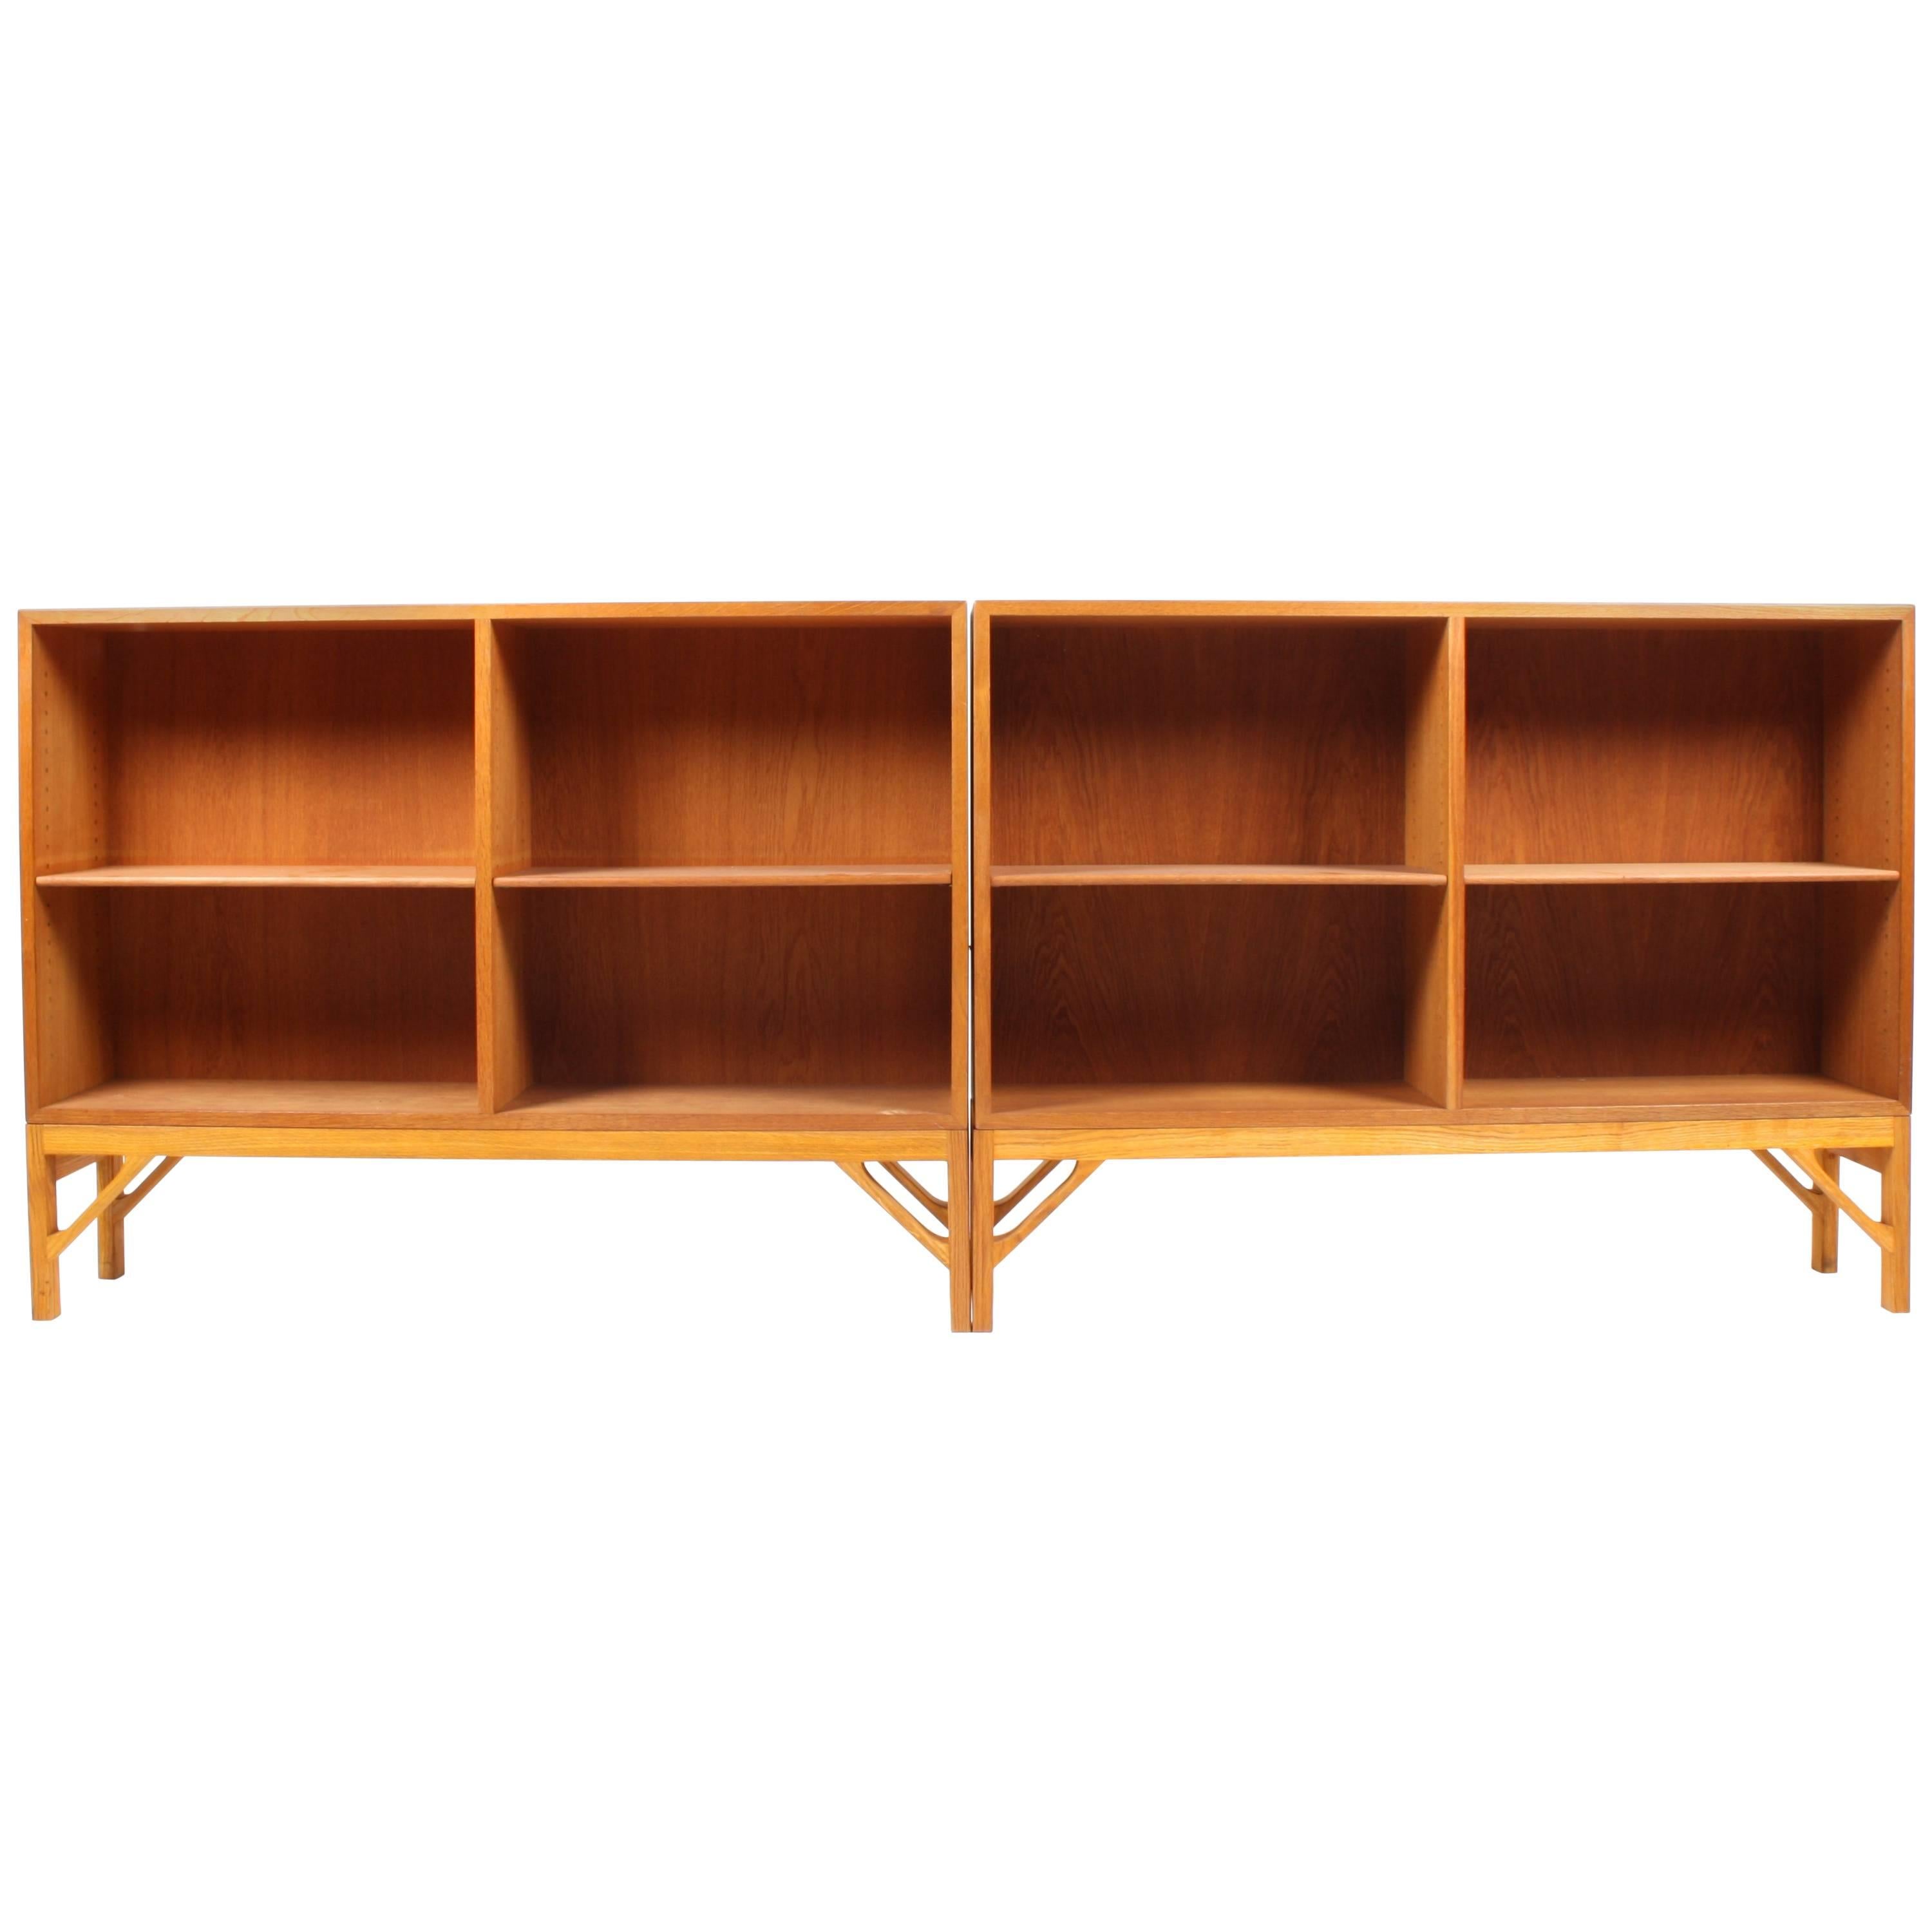 Pair of China Bookcases by Mogensen